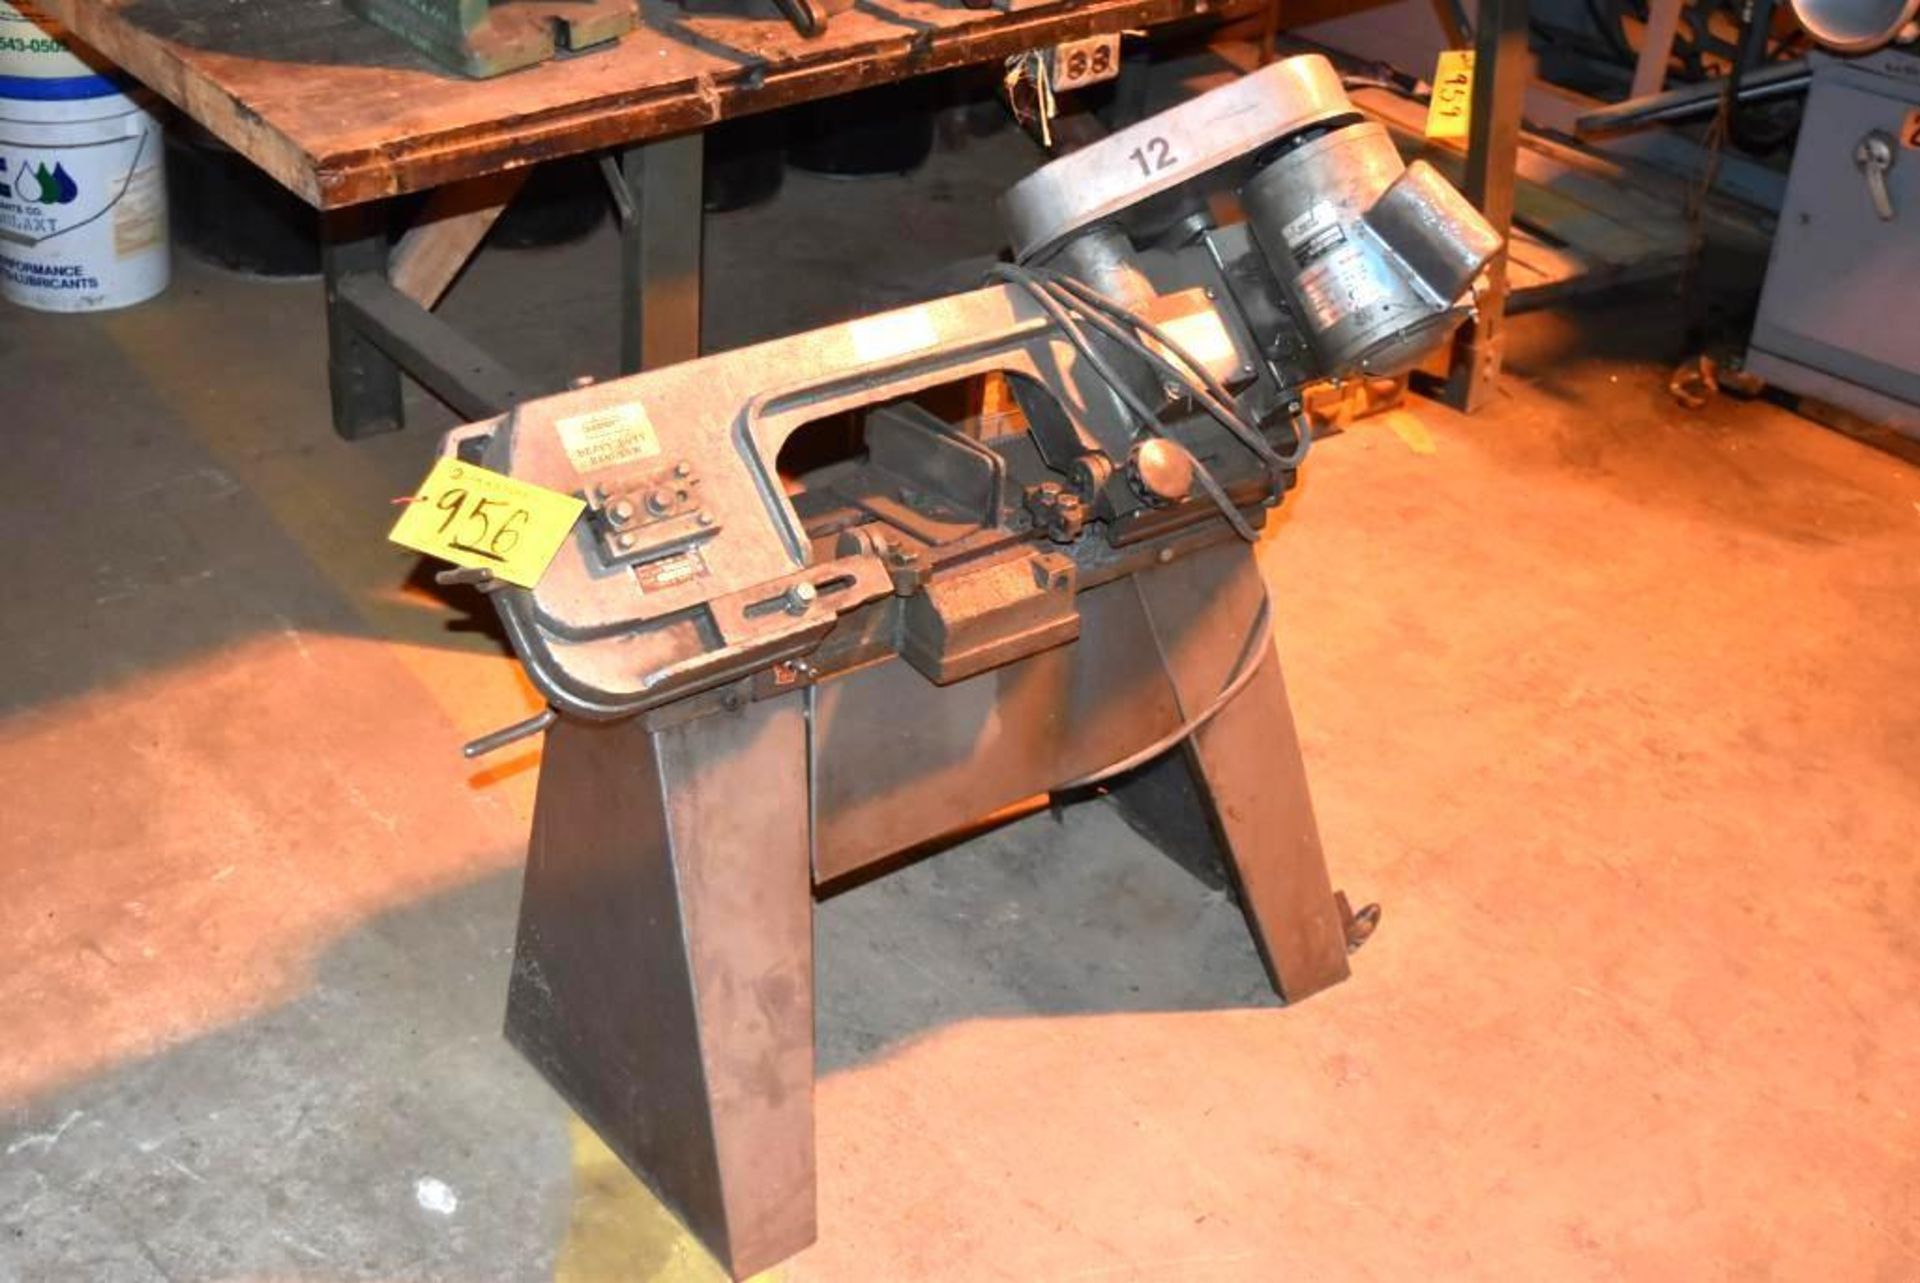 Duracraft H.D. Portable Bandsaw Model HBS-346 S/N 005565 - Image 4 of 14